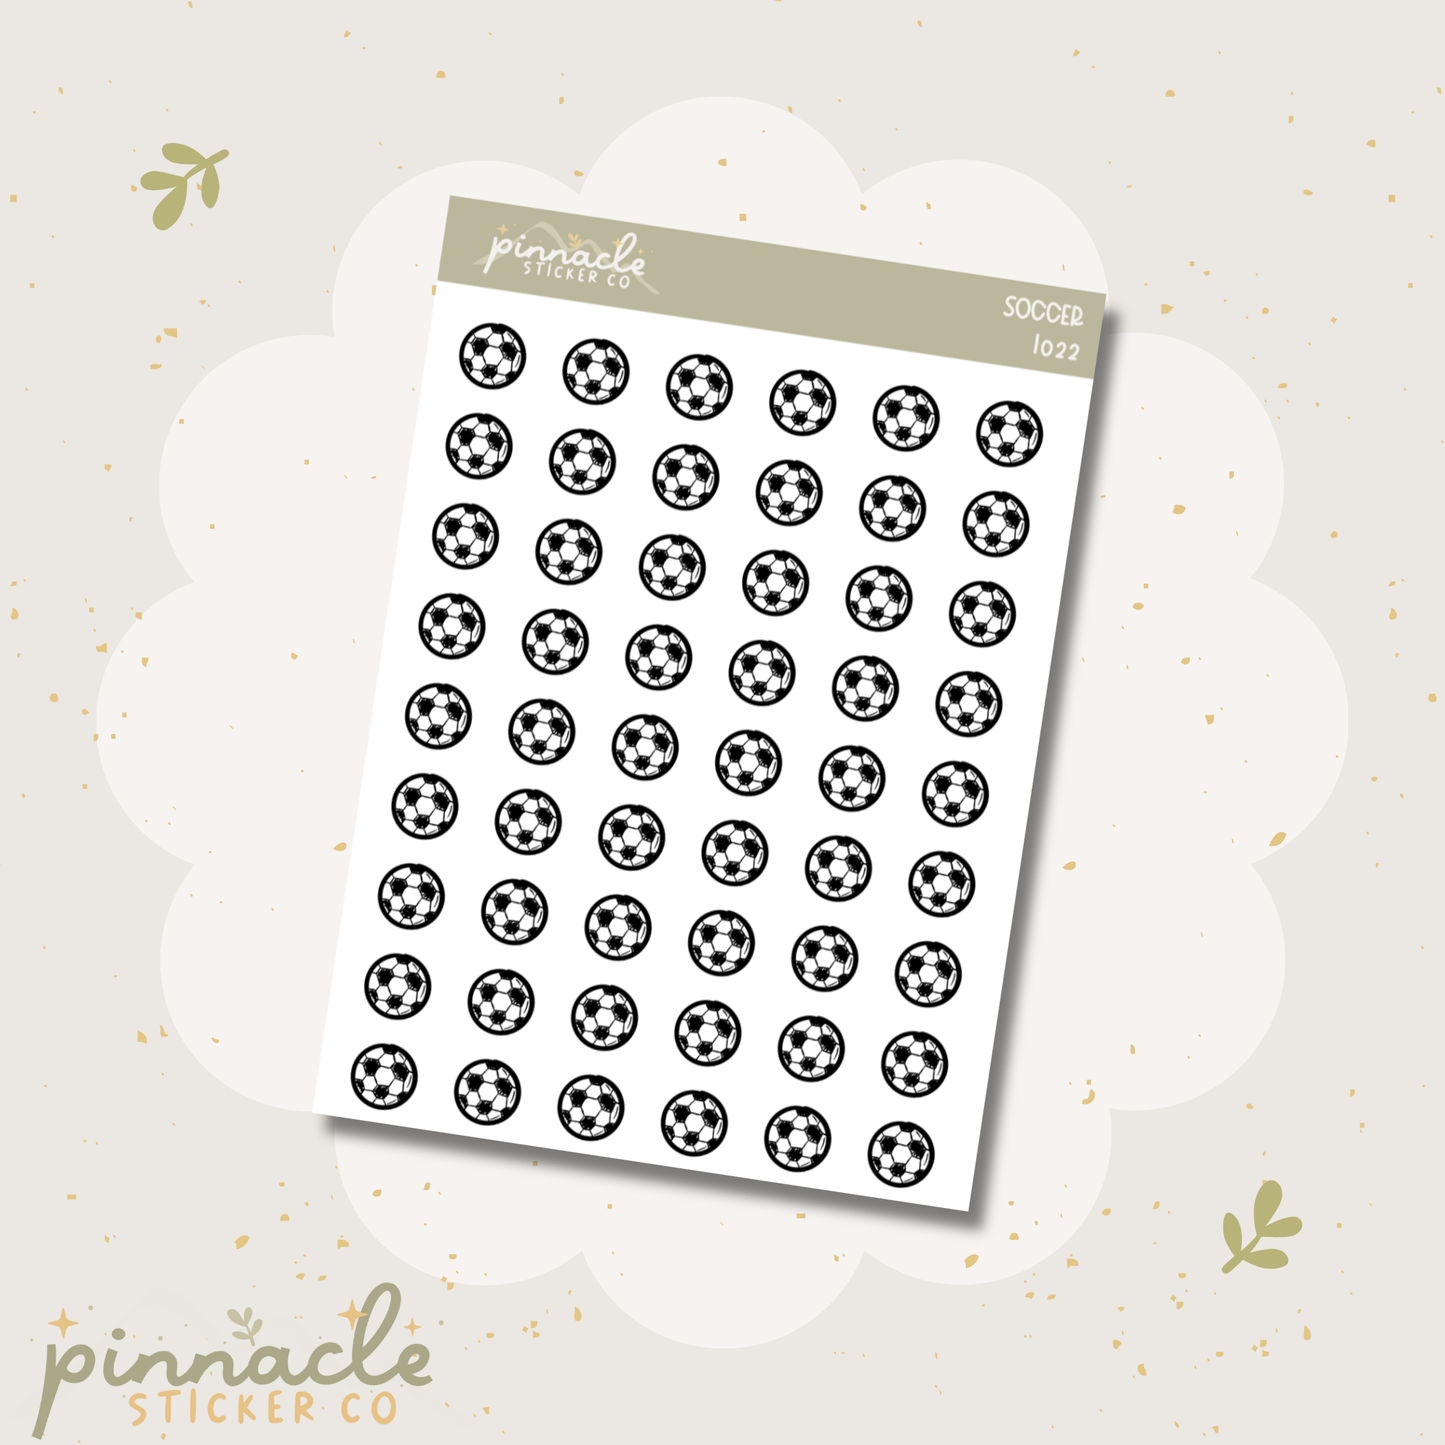 Soccer Doodle Icon Stickers I022